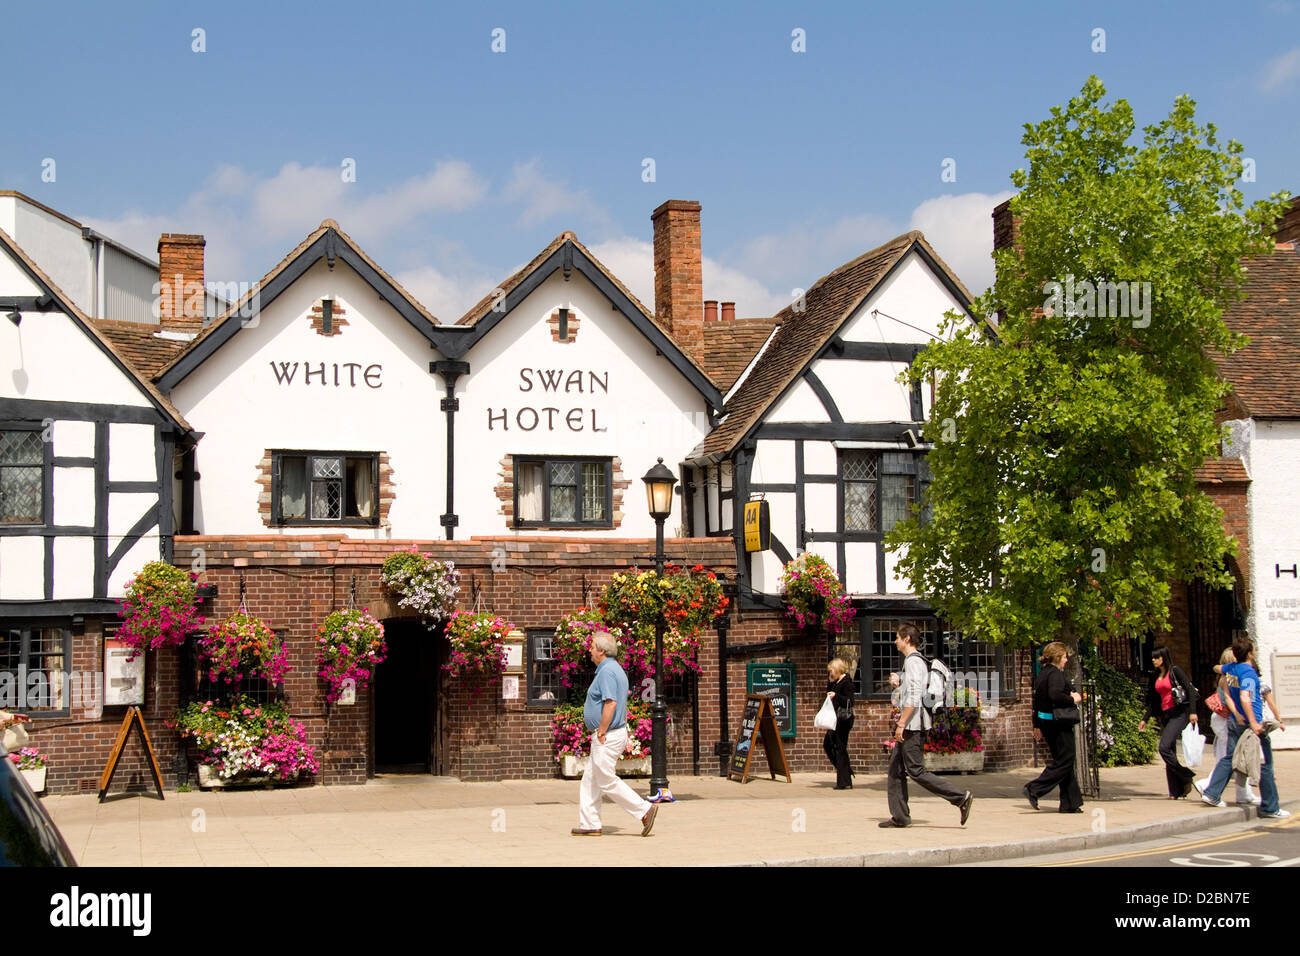 Shops On Wood Street In Home Of William Shakespeare In Stratford Upon Avon In The West Midlands Great Britian England Stock Photo